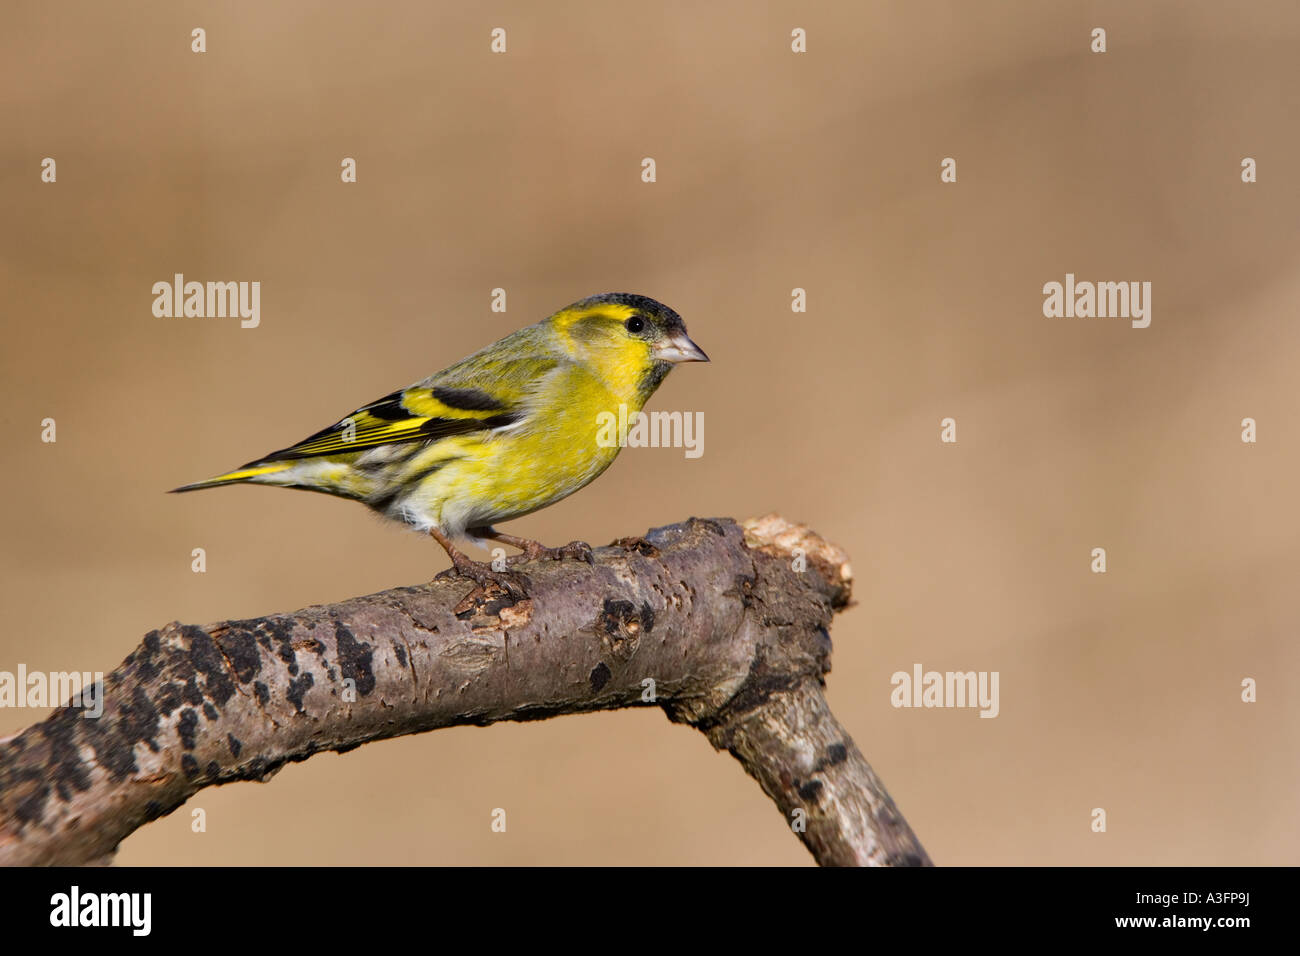 Siskin Carduelis spinus perched on branch looking alert with nice clean background potton bedfordshire Stock Photo